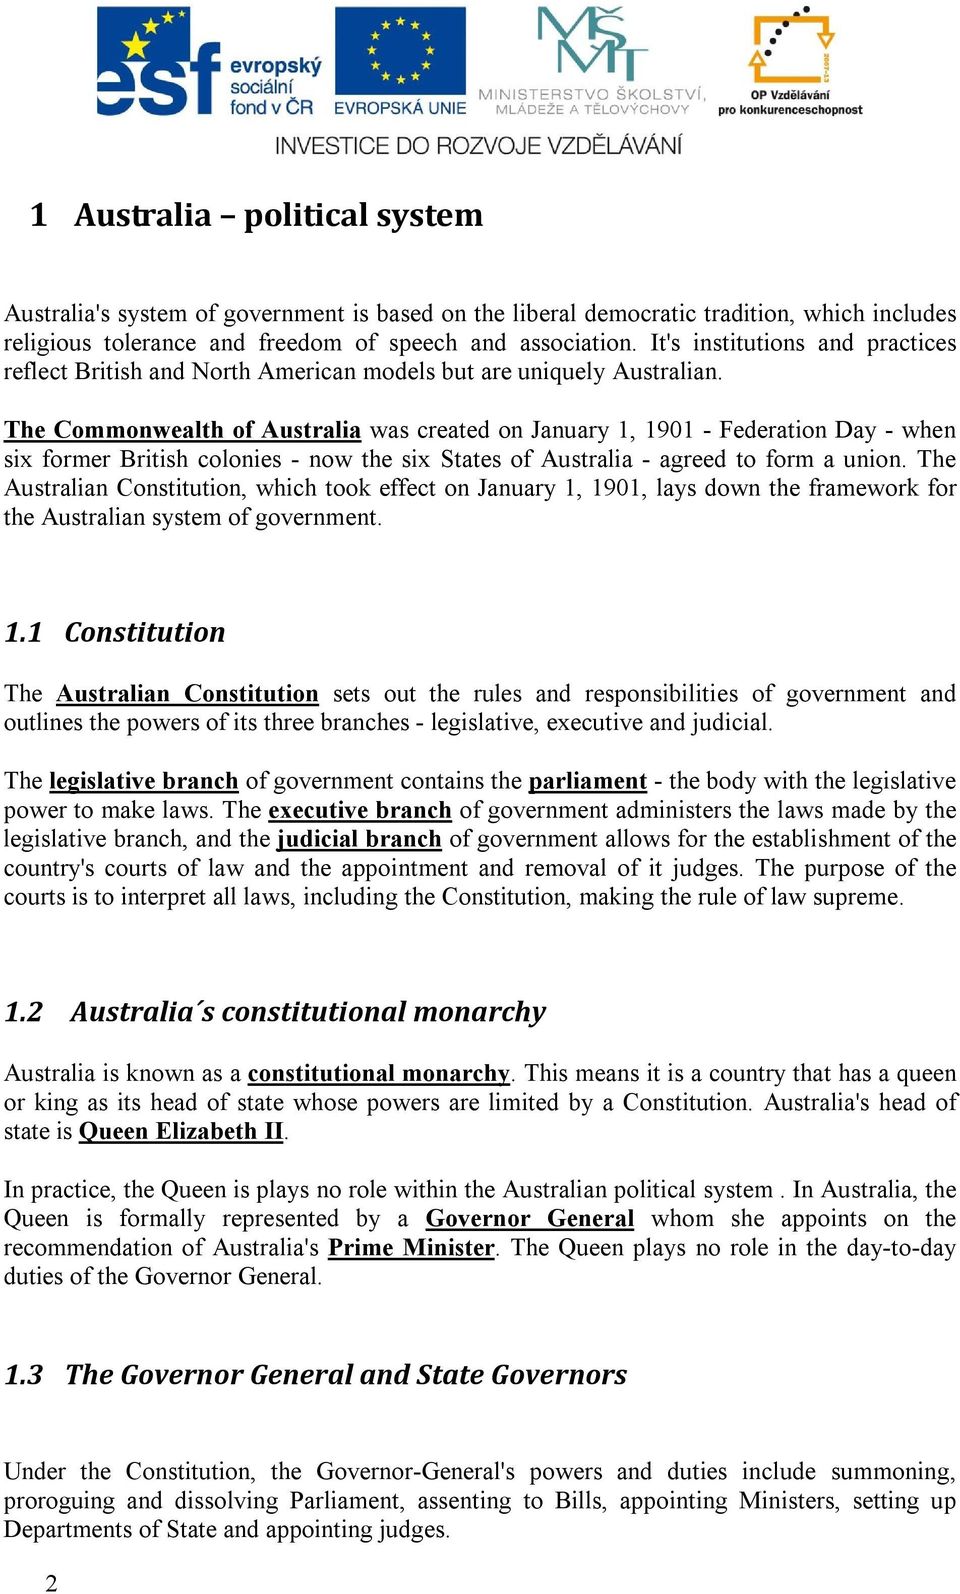 The Commonwealth of Australia was created on January 1, 1901 - Federation Day - when six former British colonies - now the six States of Australia - agreed to form a union.